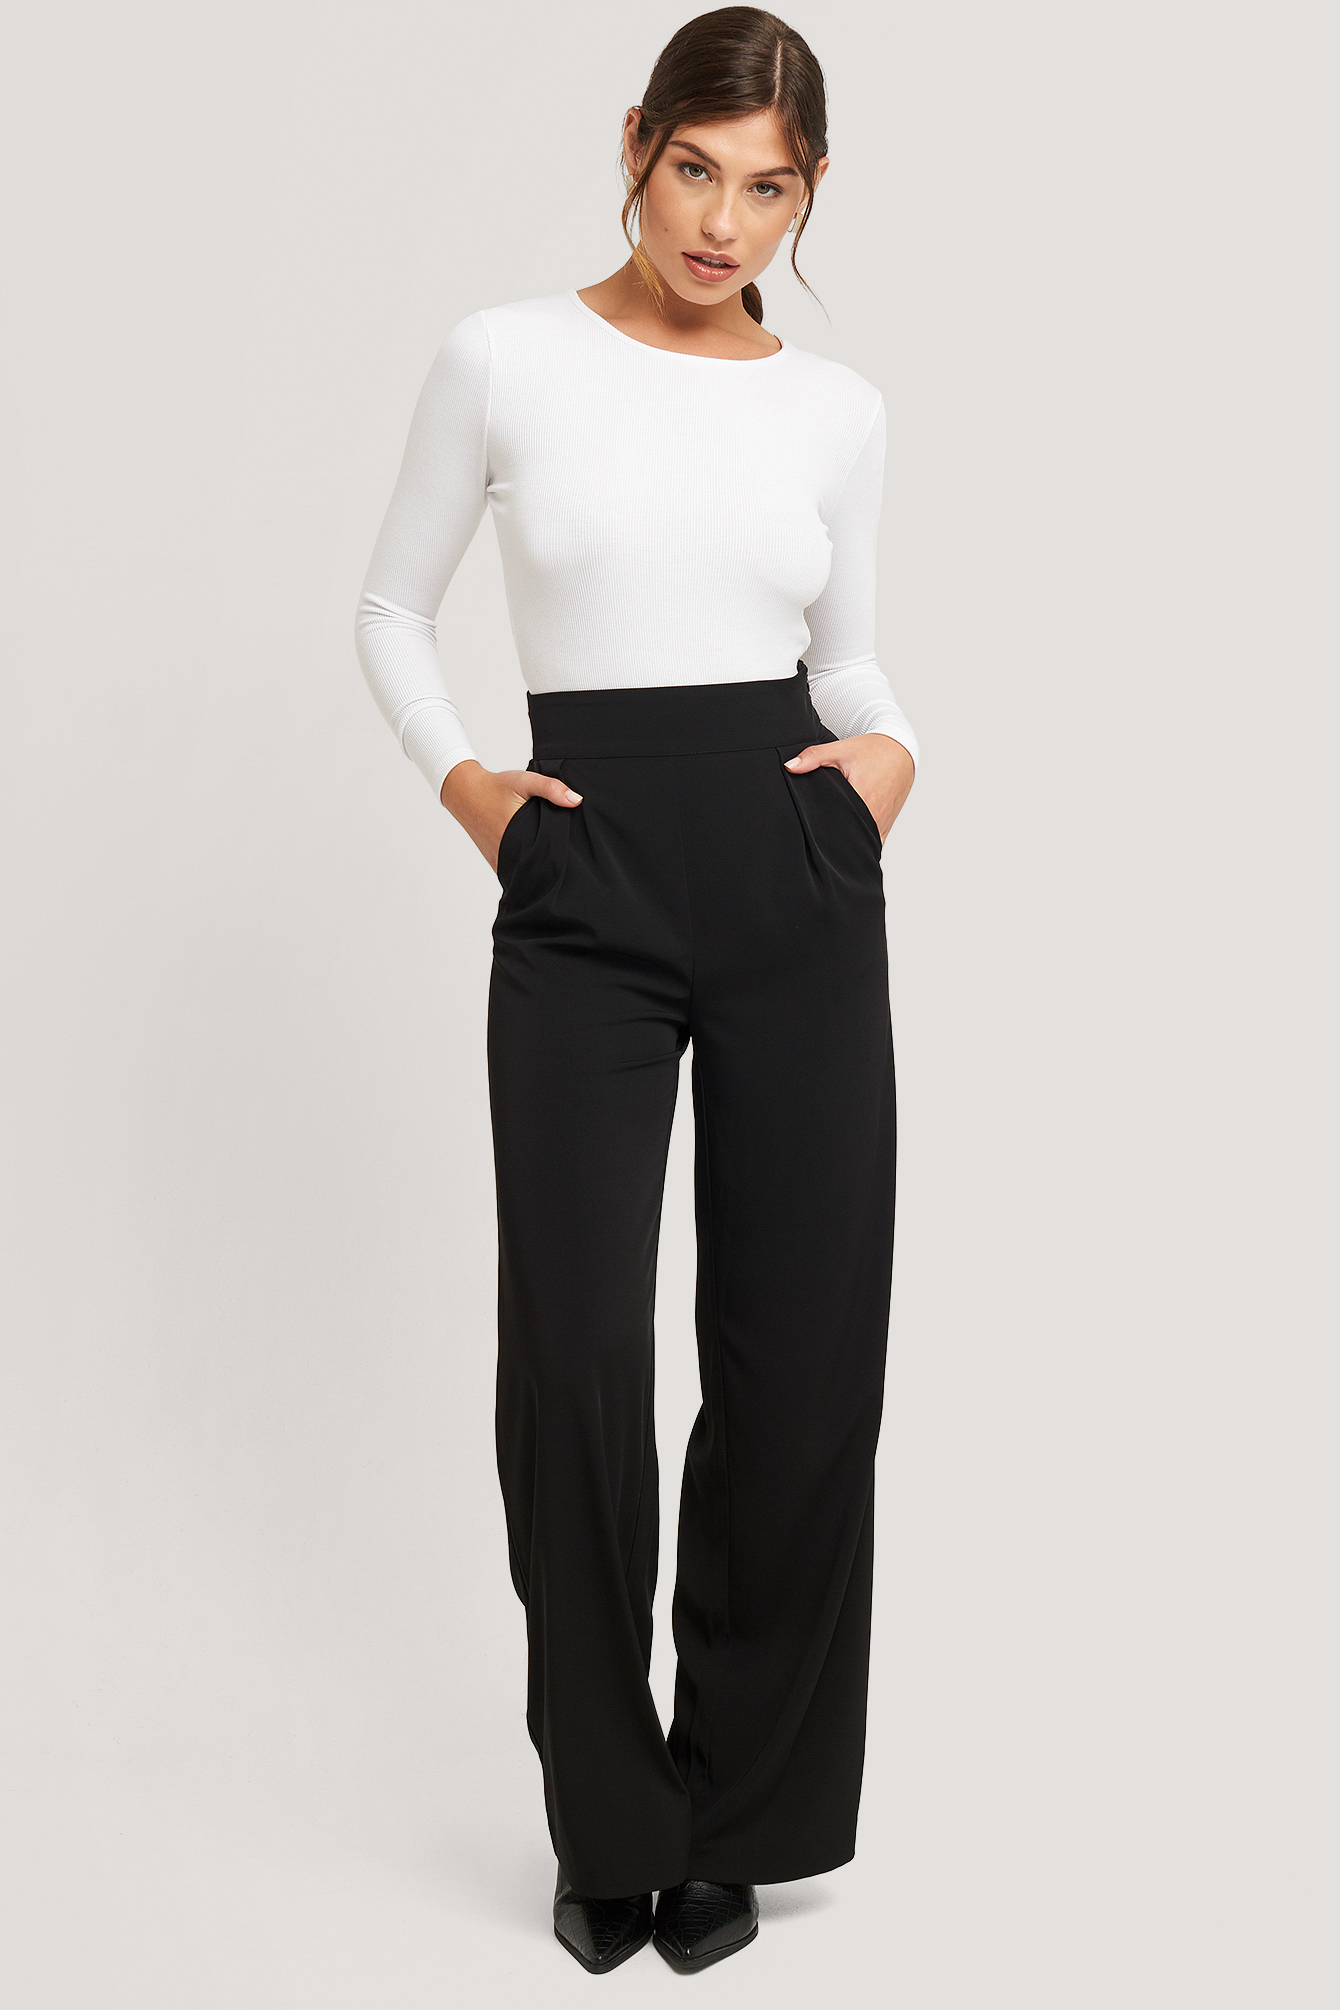 Buy High Waisted Pants for Women Online from Blissclub